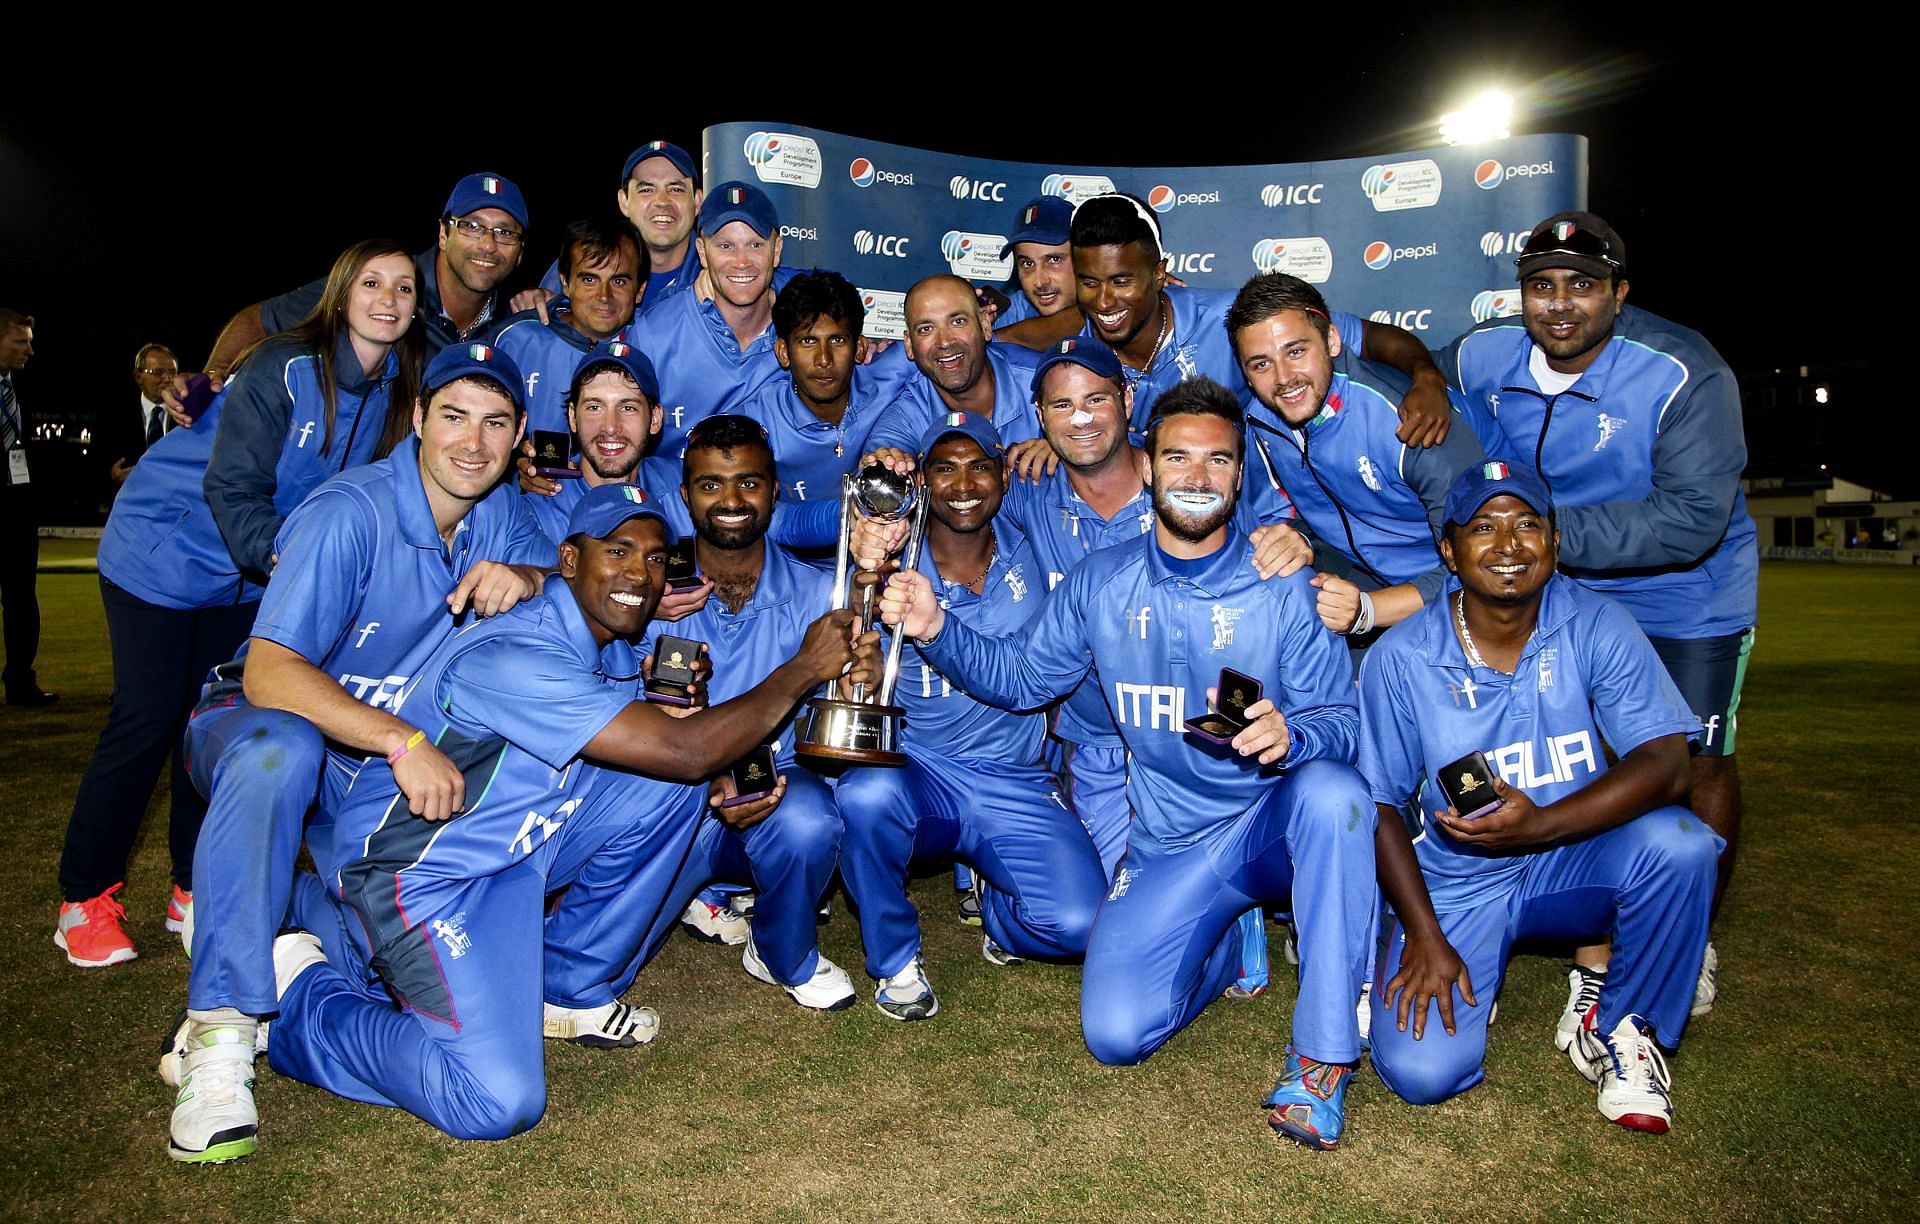 Italy with the ICC European Division 1 Trophy.